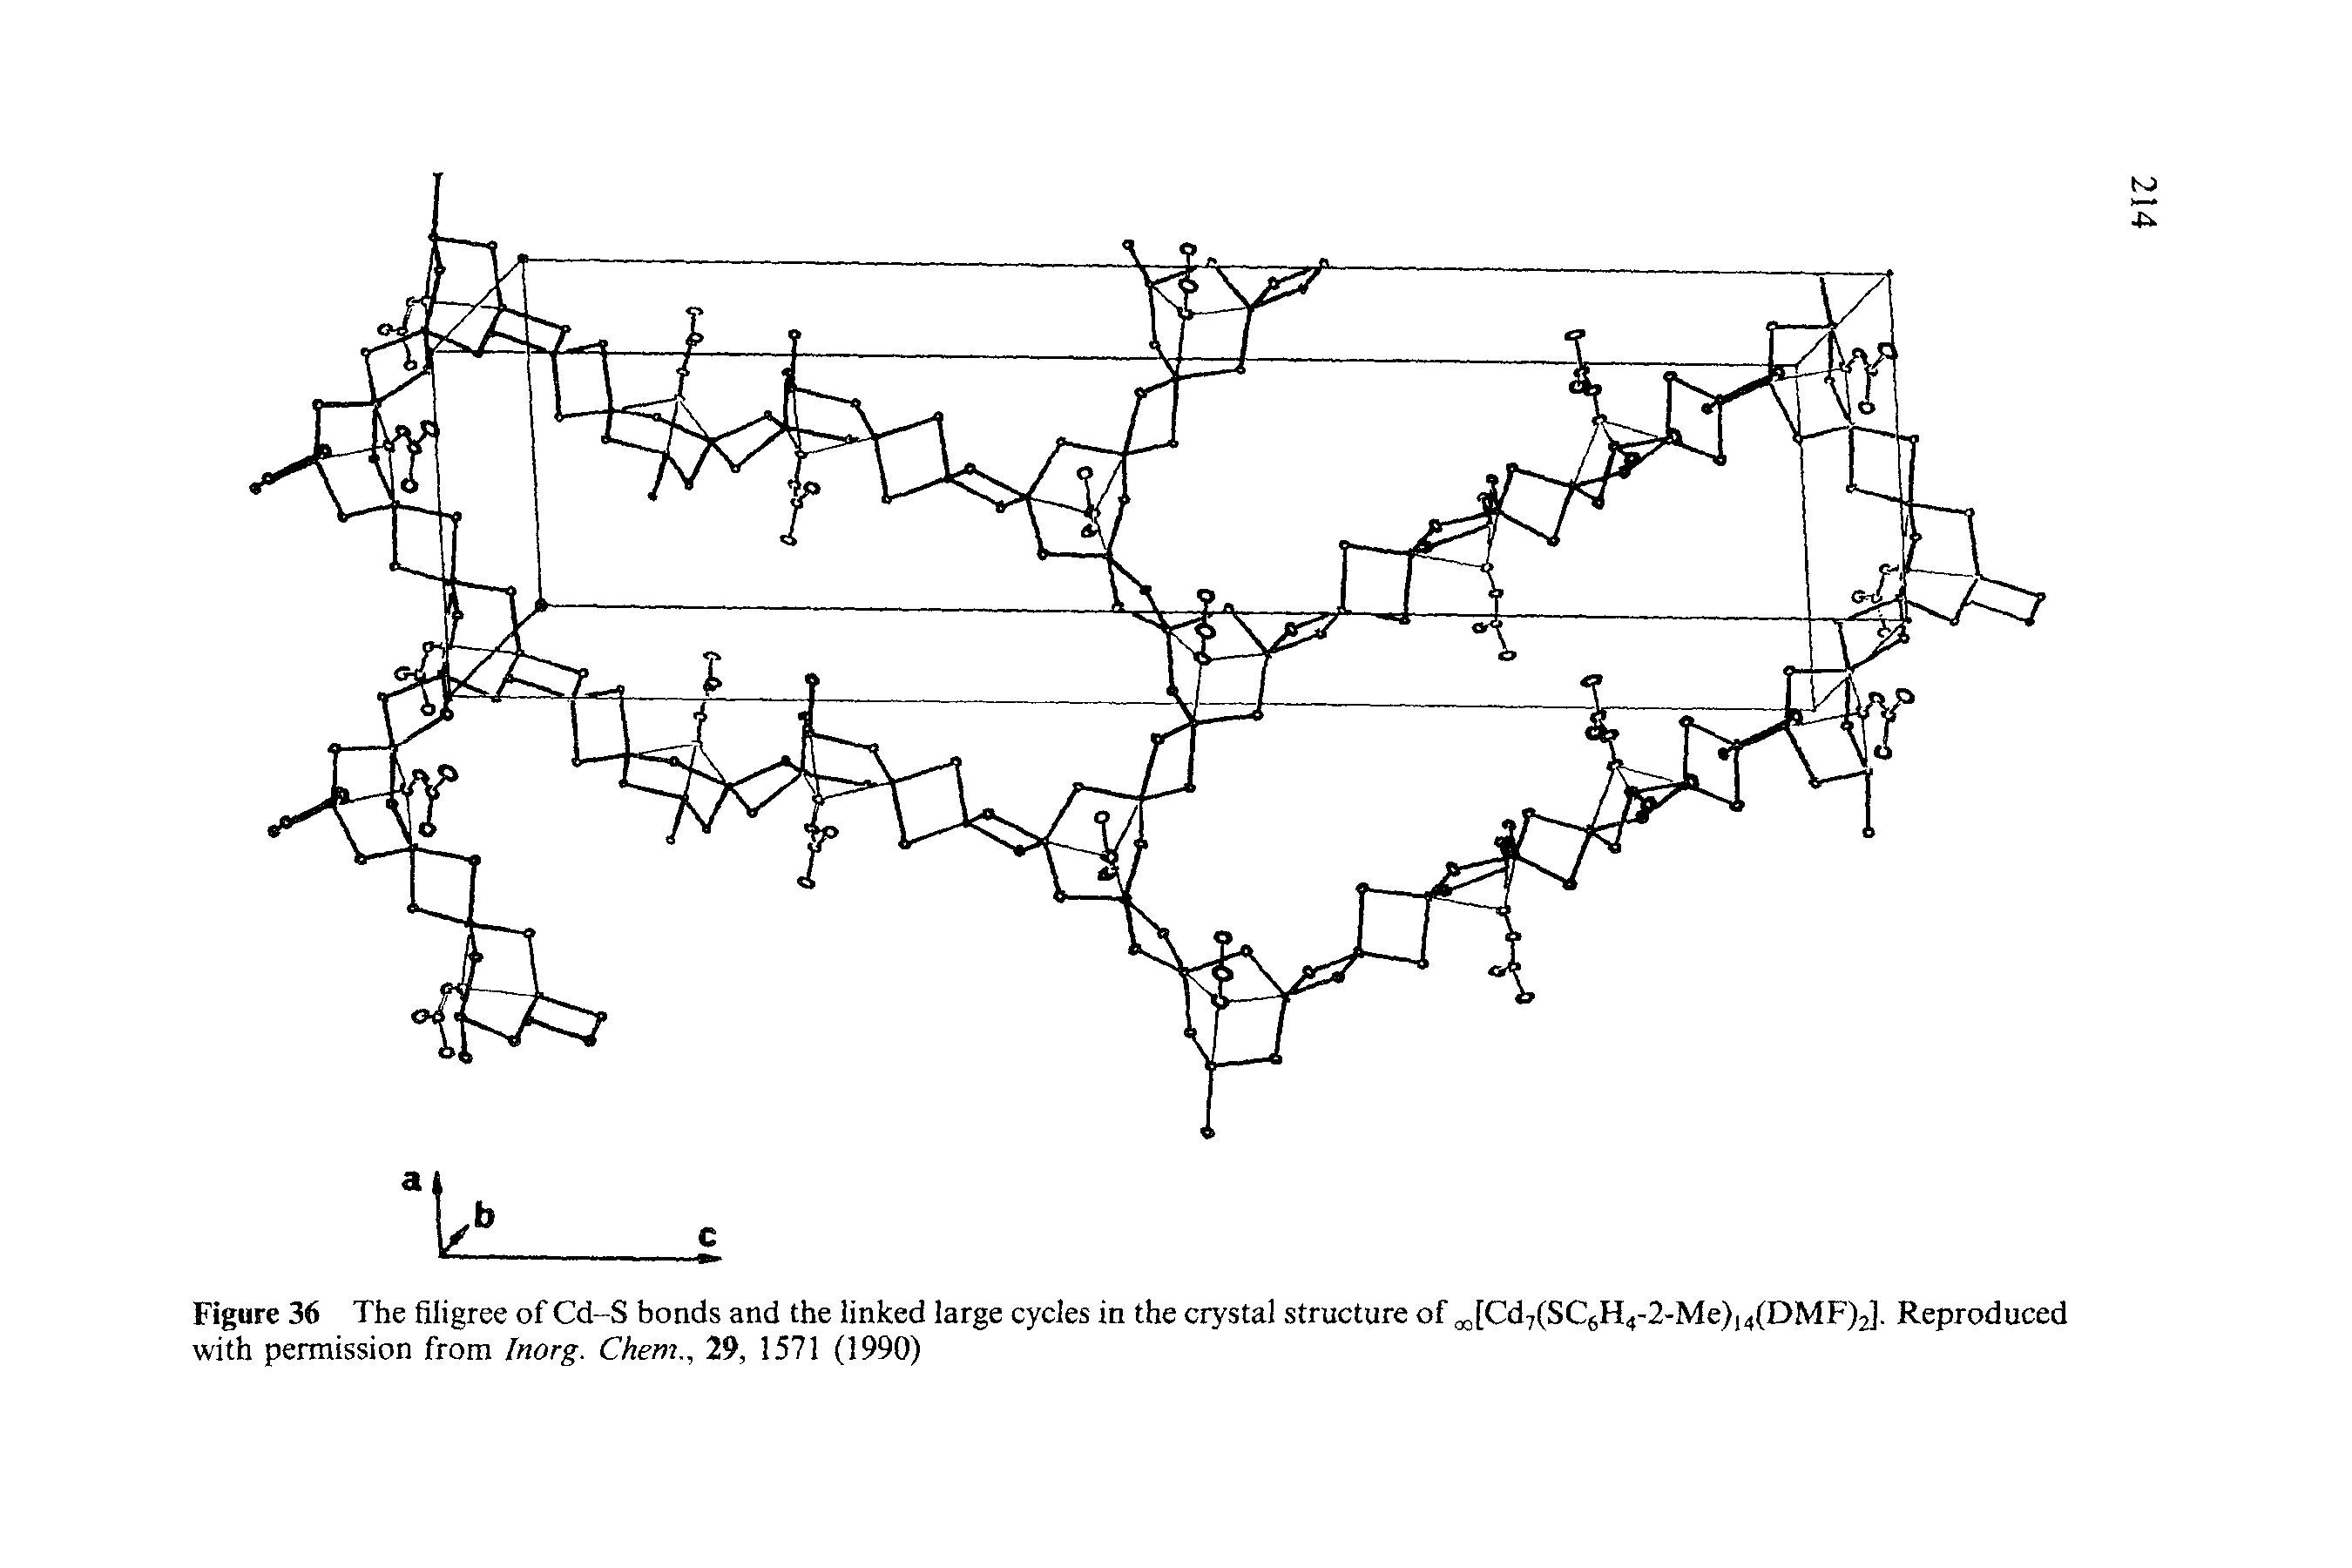 Figure 36 The filigree of Cd-S bonds and the linked large cycles in the crystal structure of [Cd7(SC6H4-2-Me),4(DMF)J. Reproduced with permission from Inorg. Chem., 29, 1571 (1990)...